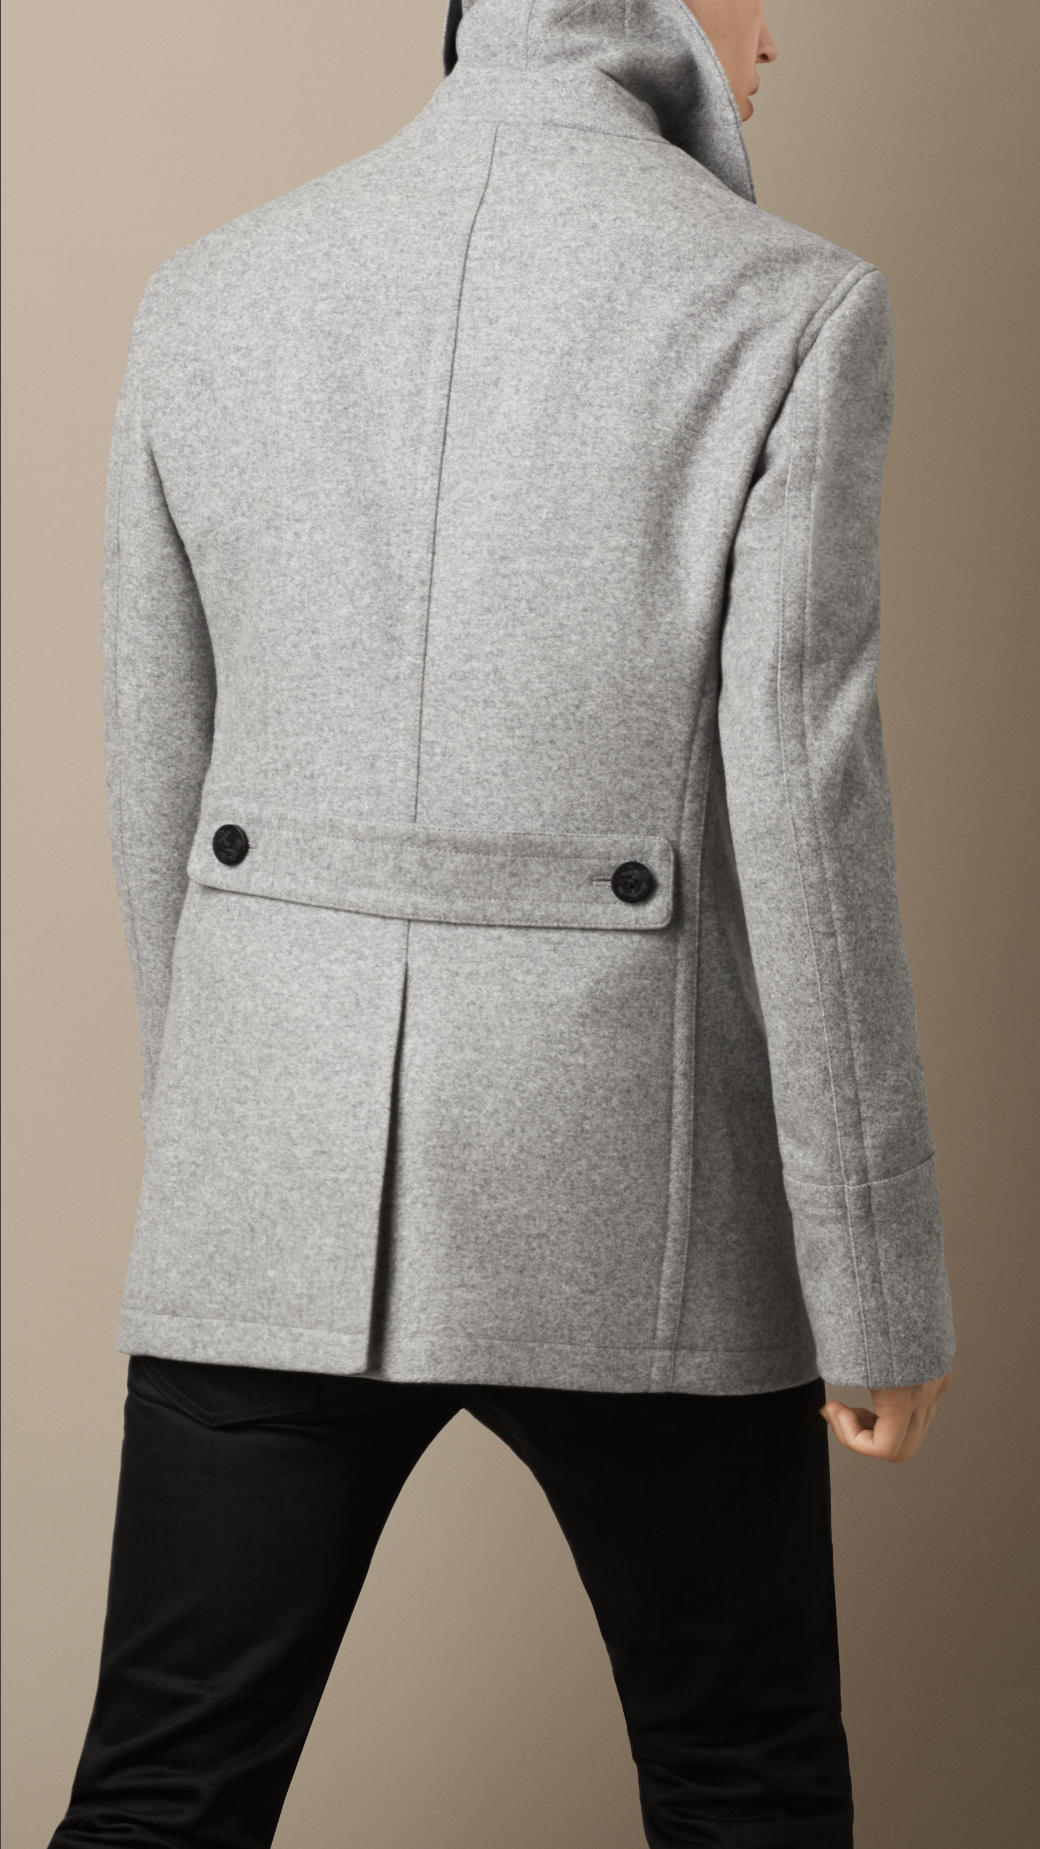 Lyst - Burberry Wool Cashmere Pea Coat in Gray for Men